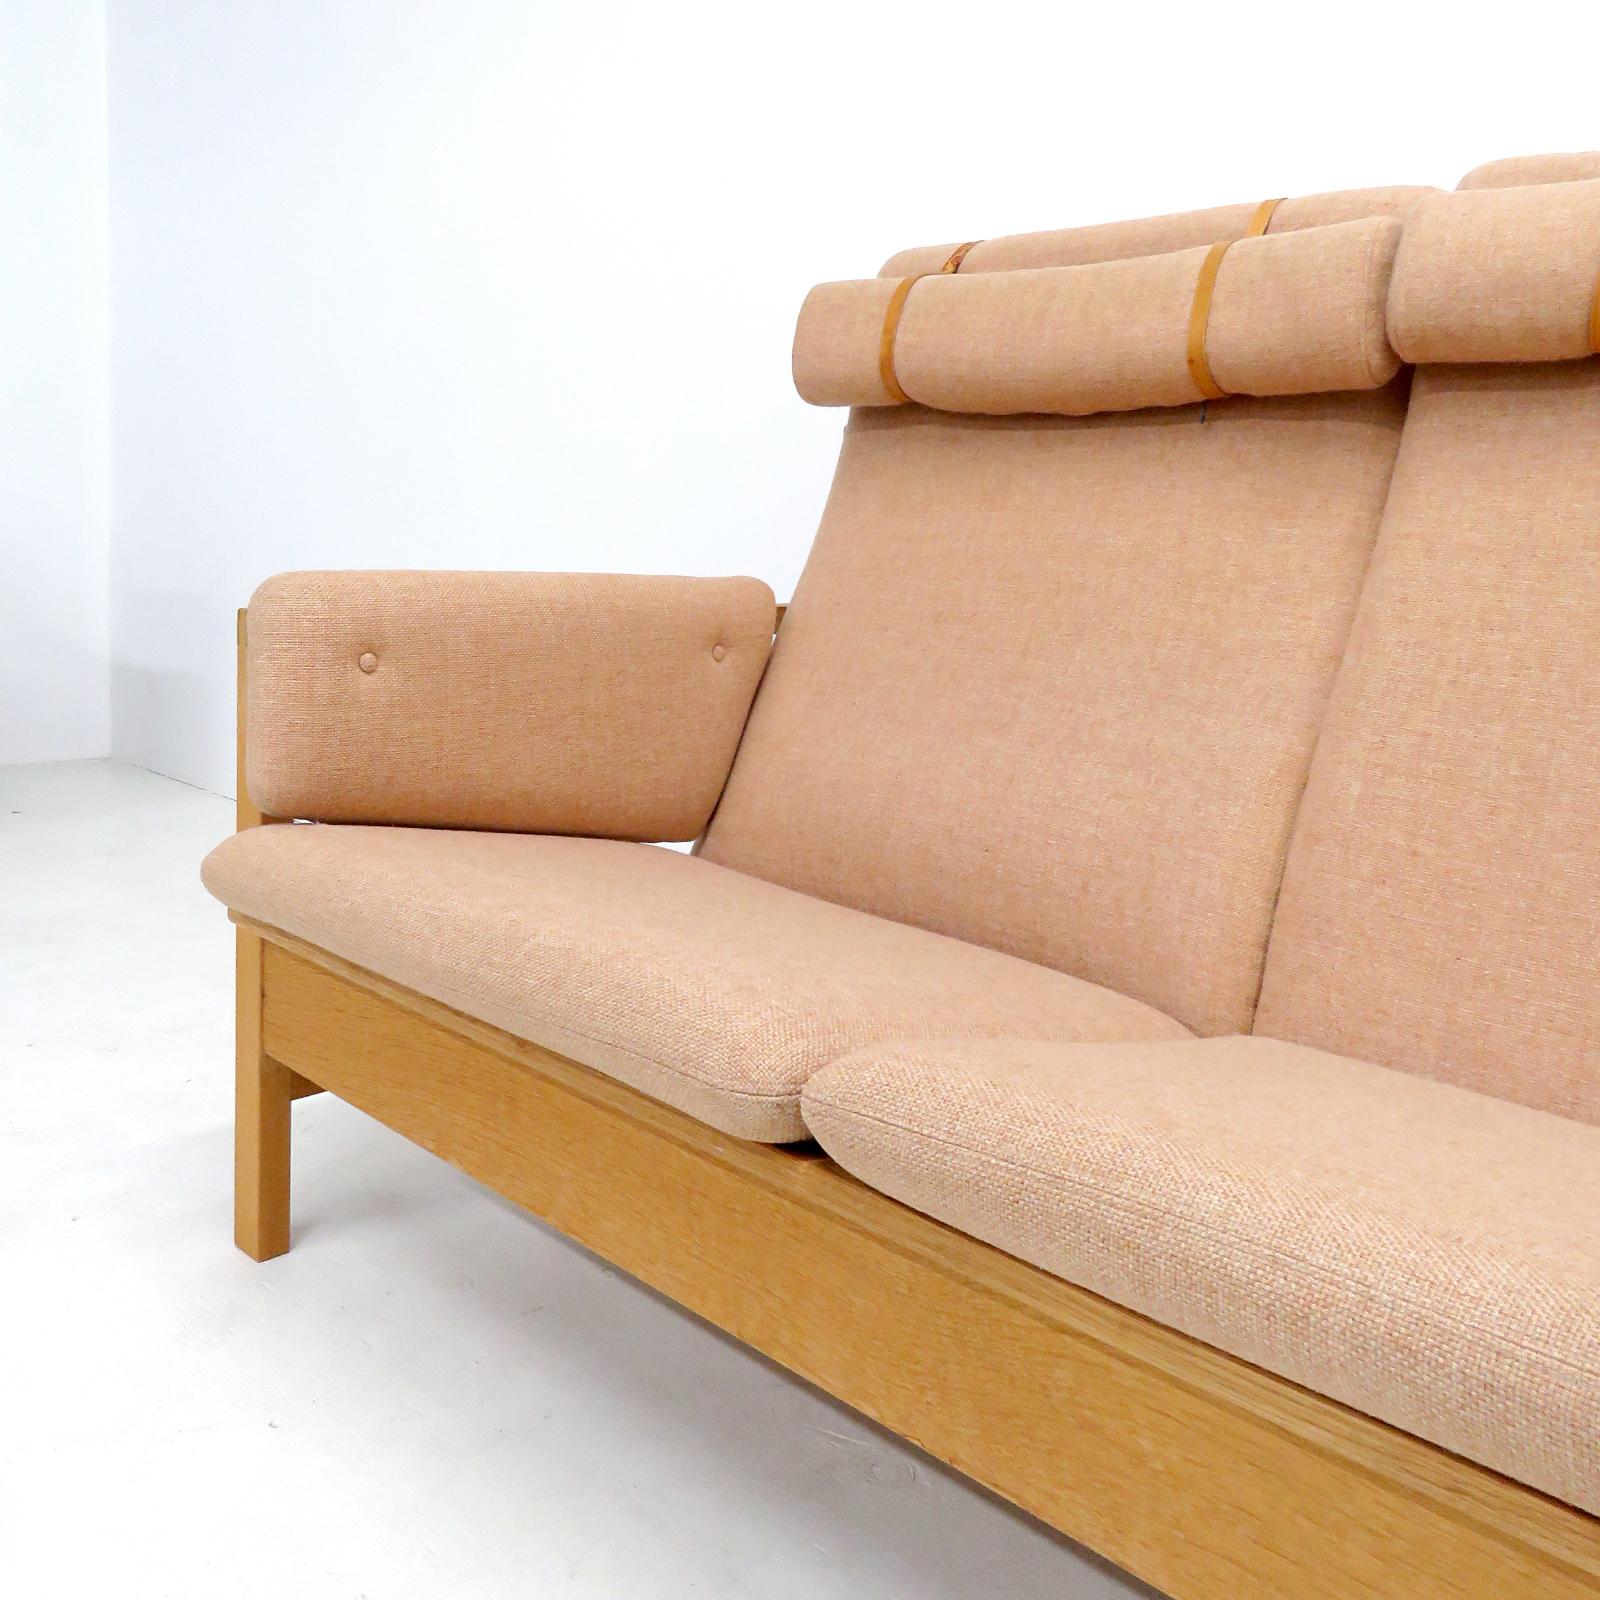 Børge Mogensen Model #2253 Three-Seat Sofa, 1960 In Good Condition For Sale In Los Angeles, CA